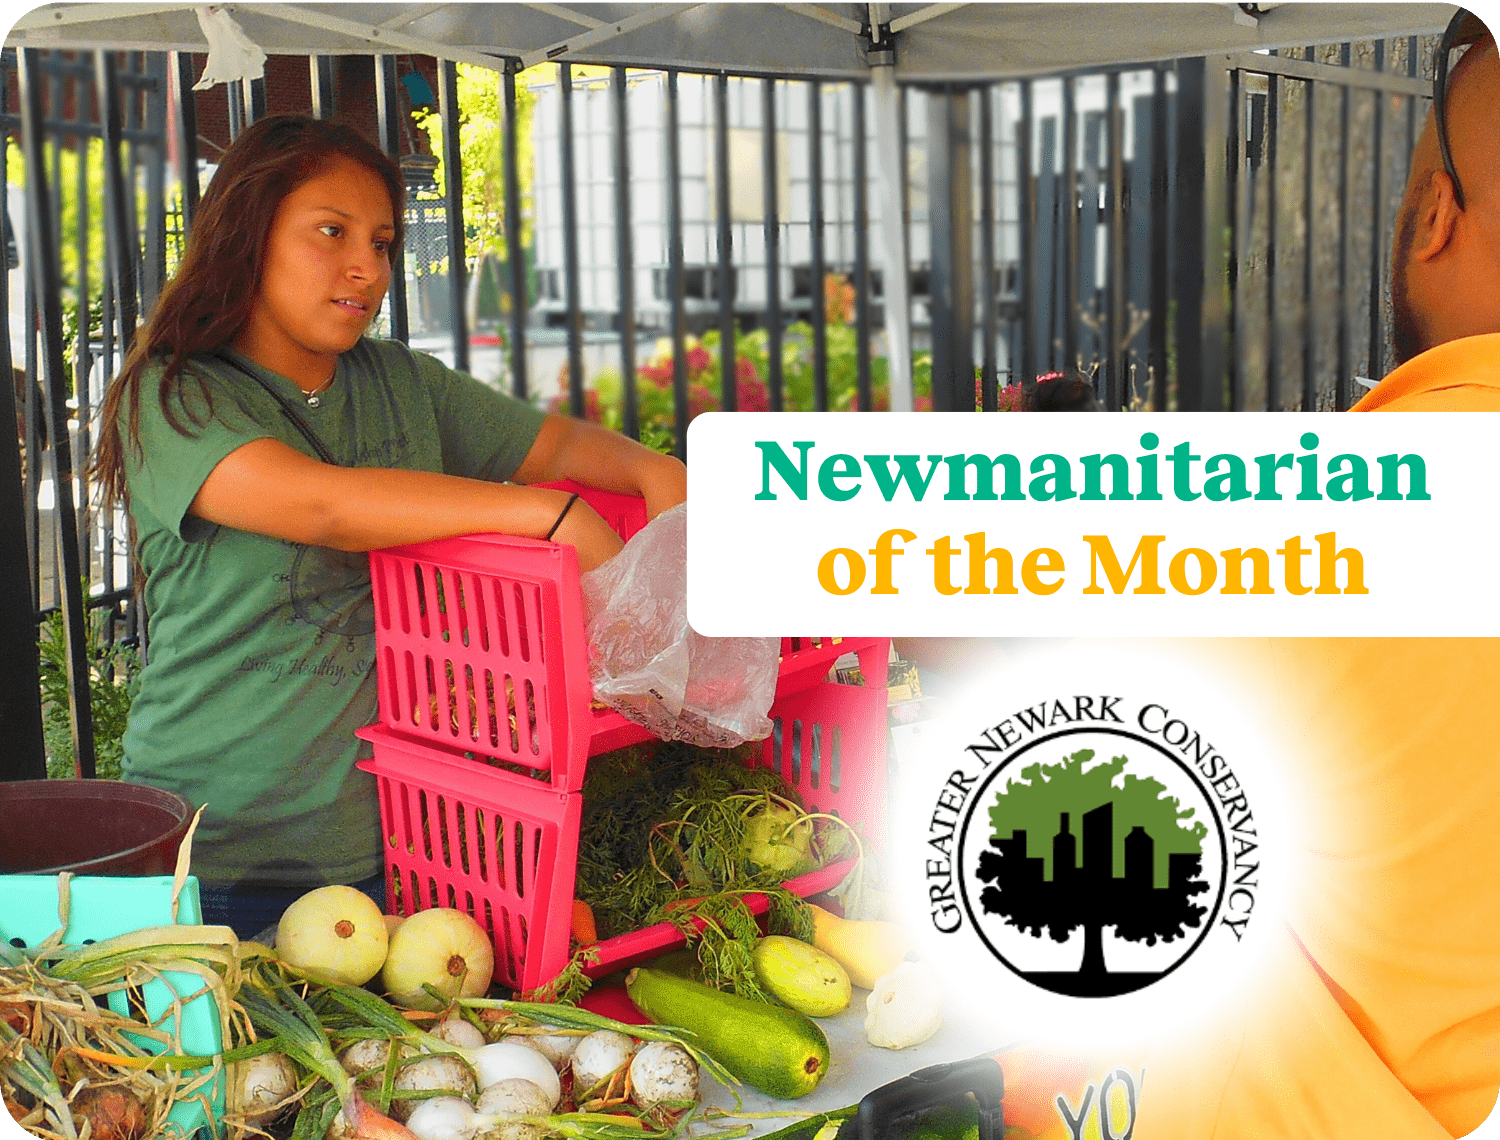 Bringing Produce to the People with Greater Newark Conservancy